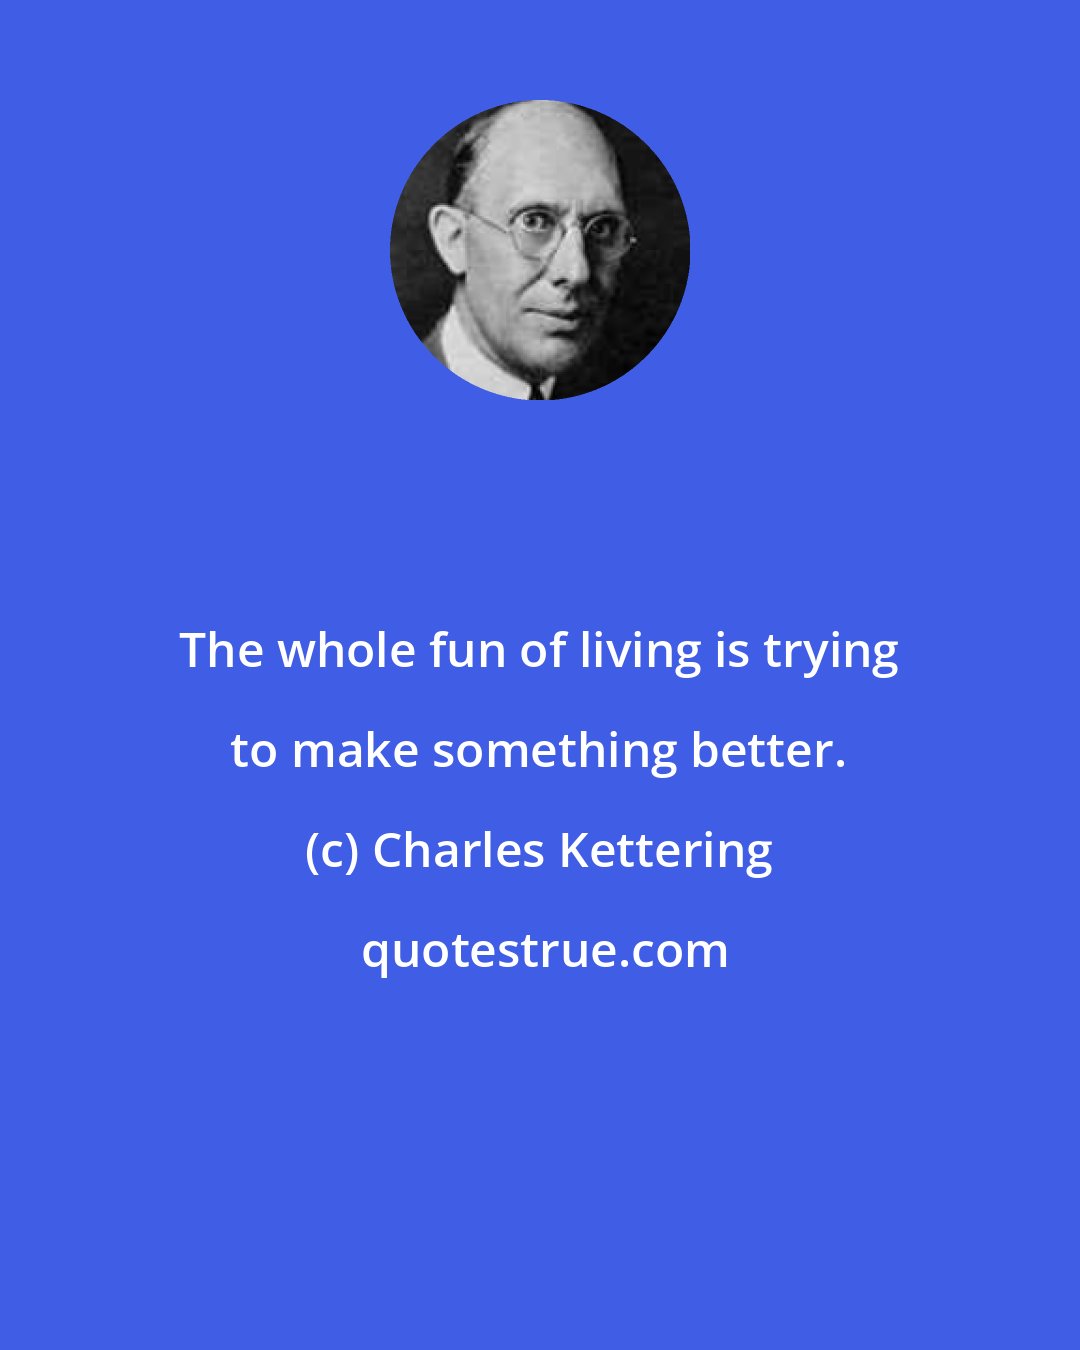 Charles Kettering: The whole fun of living is trying to make something better.